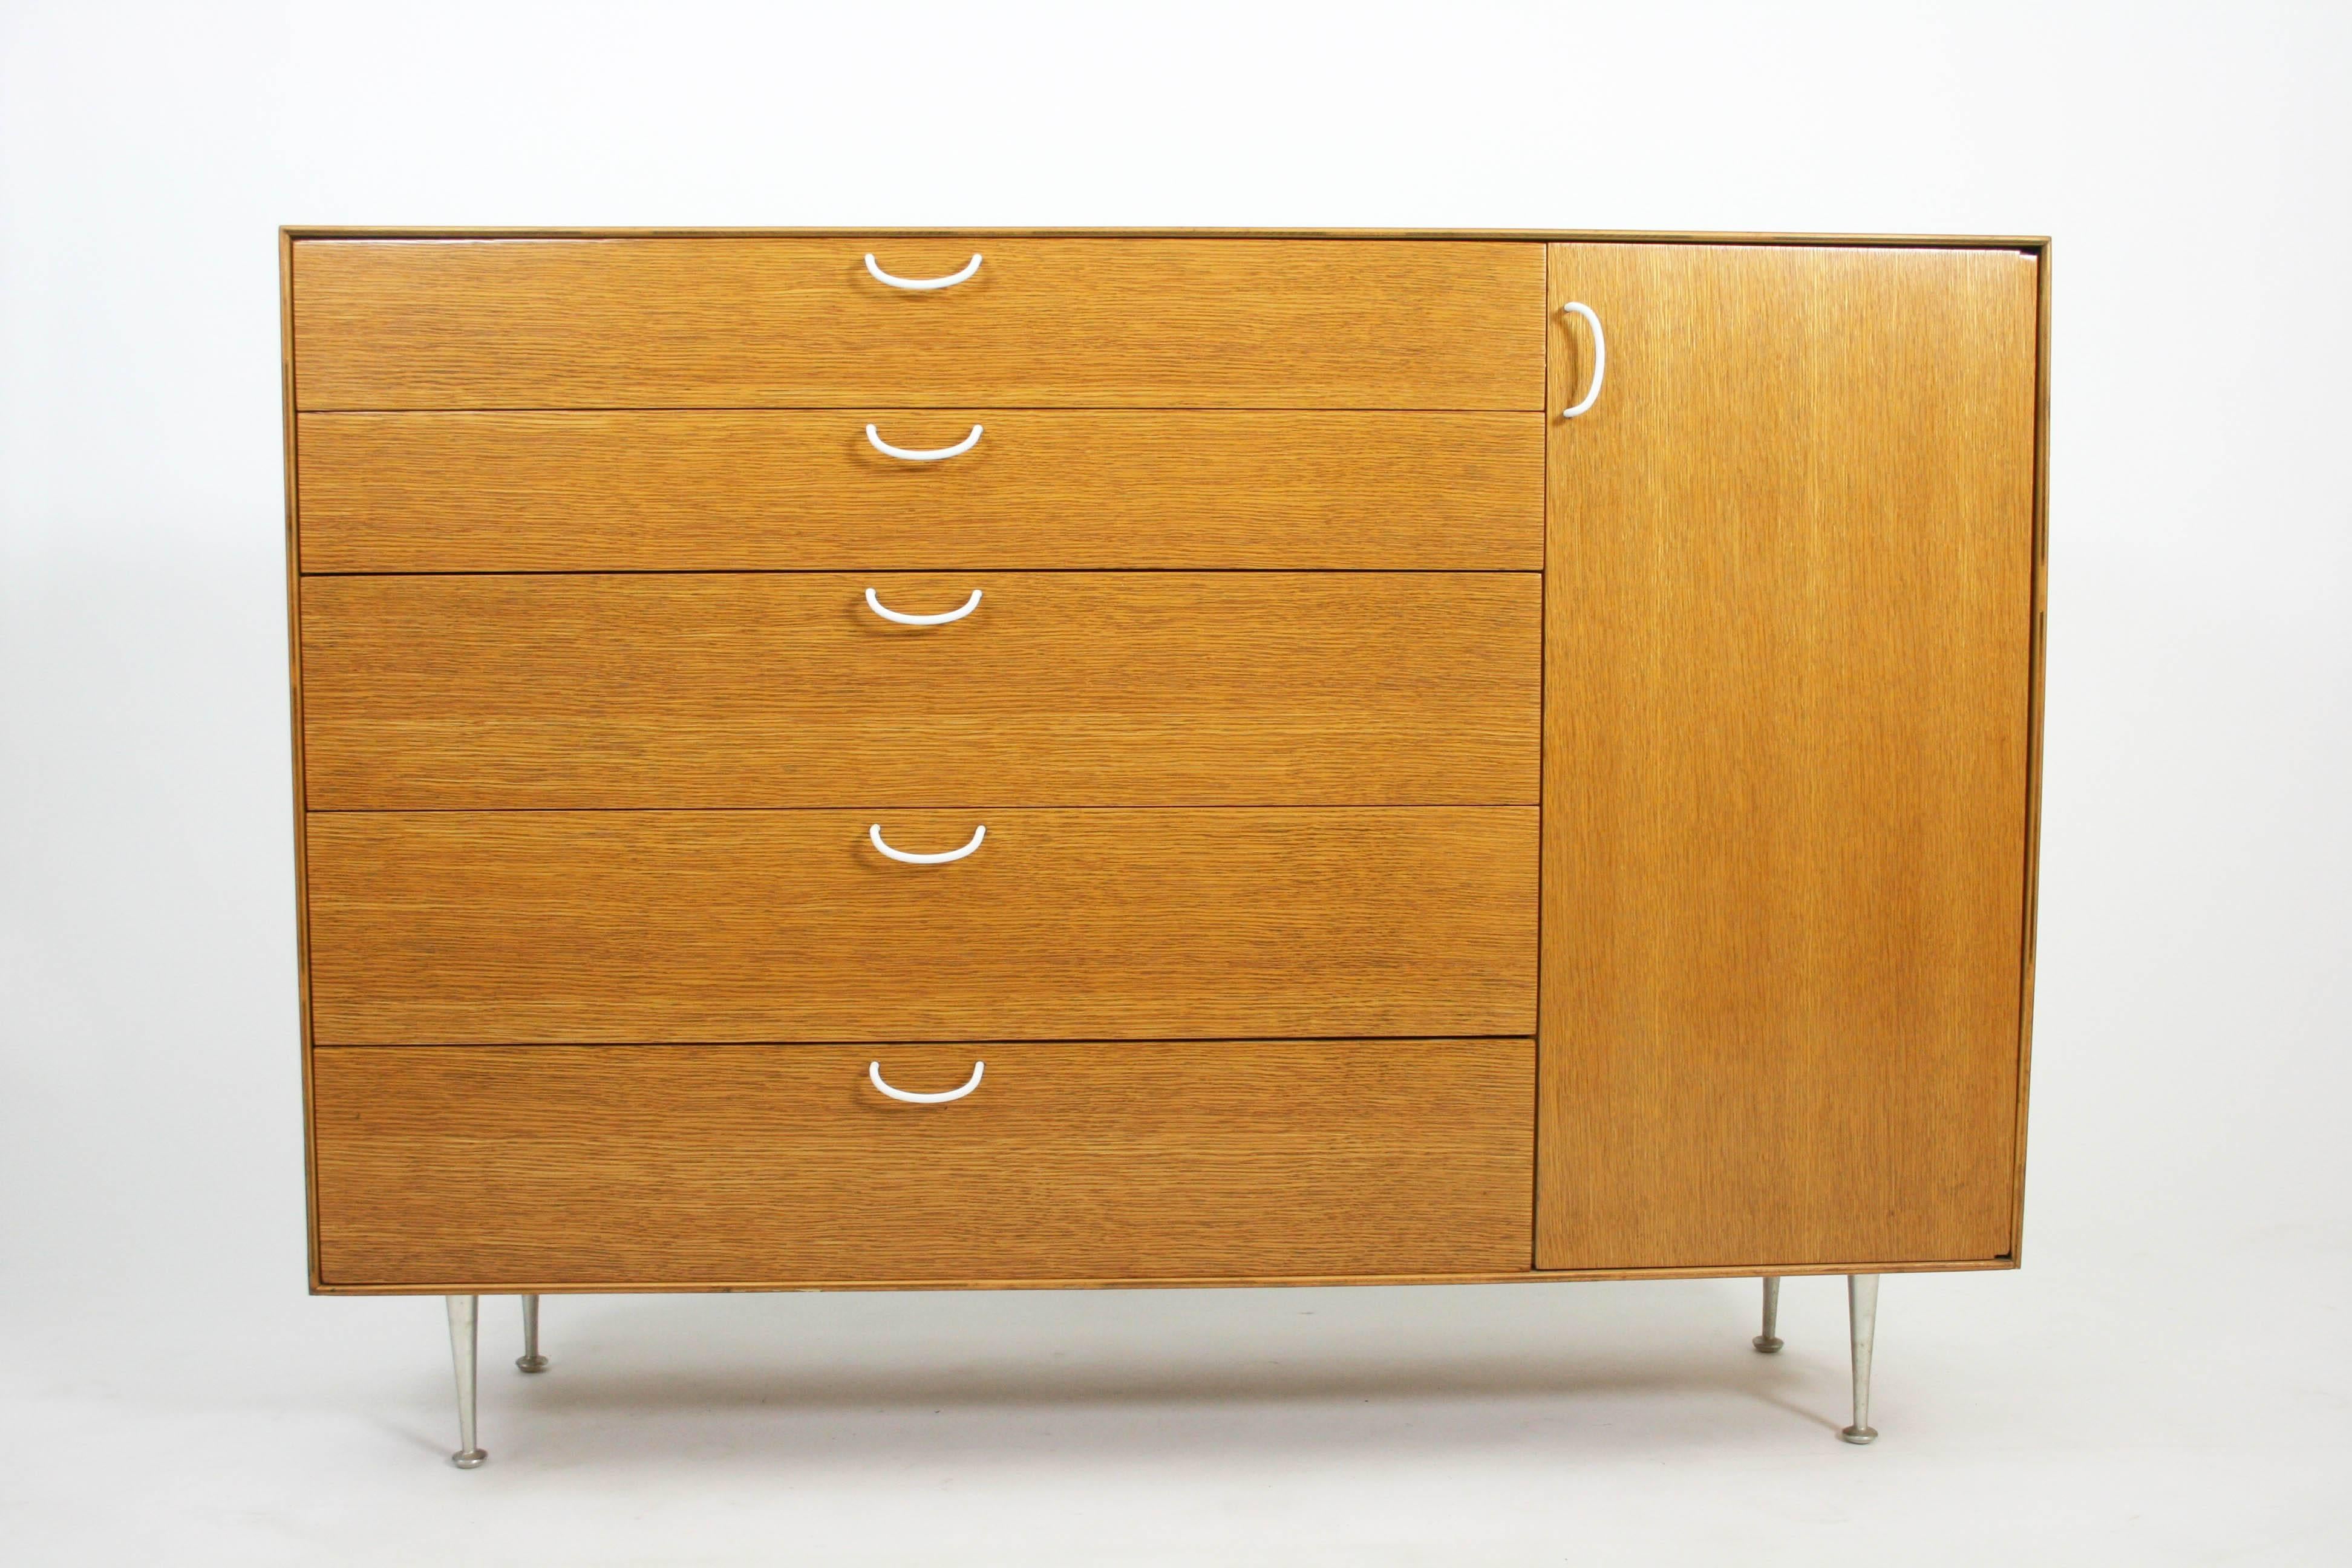 Rare combed oak thin edge George Nelson cabinet for Herman Miller. This cabinet is very rare and was only in production for less than one year. It has unique wire rod pulls which were exclusive to this line. Lots of drawers and storage on this